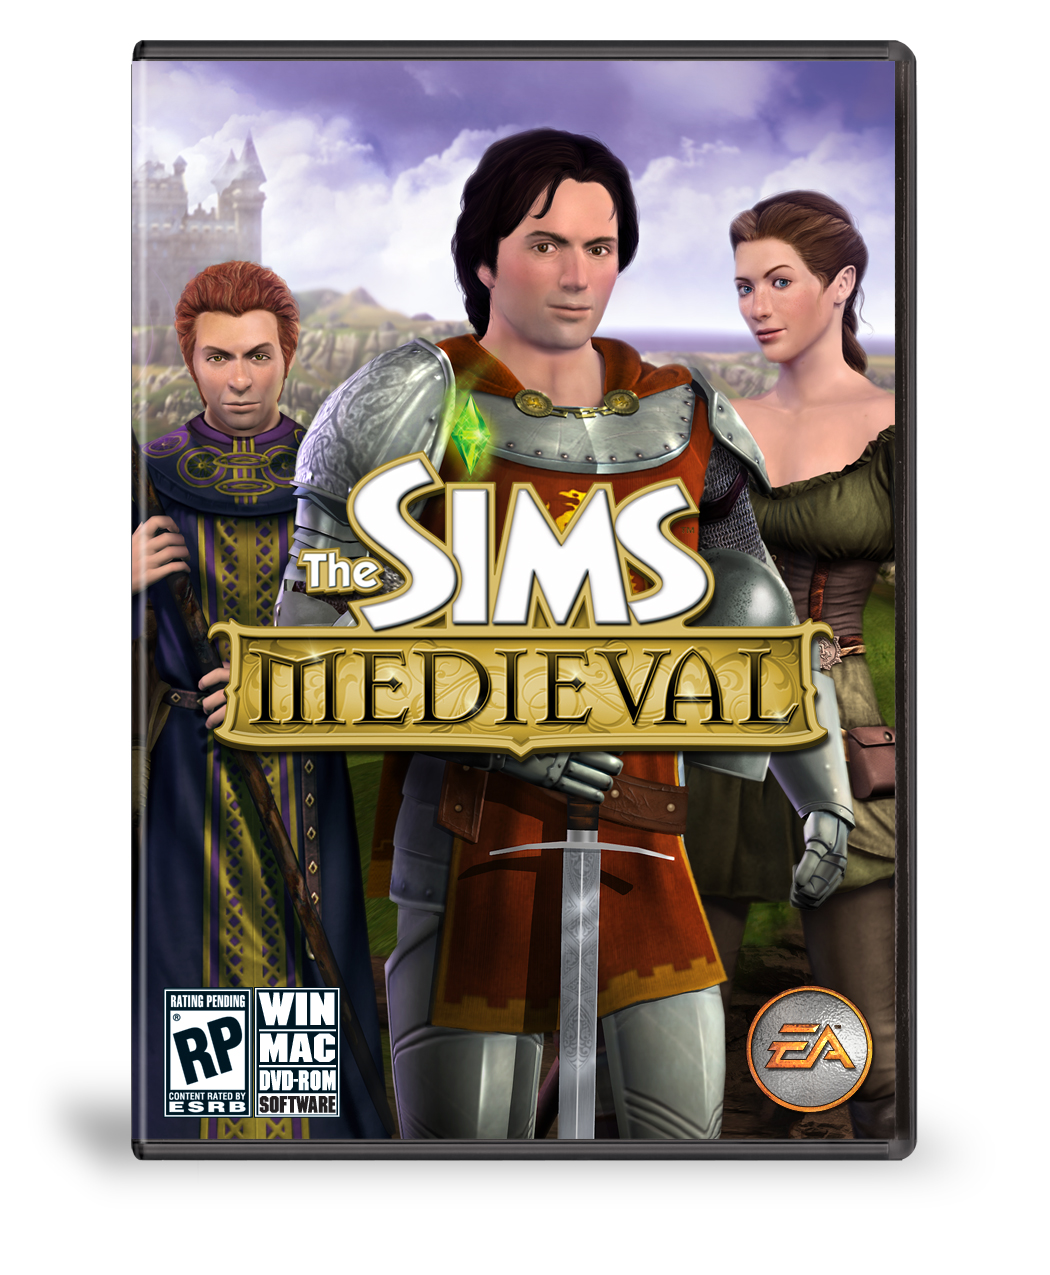 the sims medieval pirates and nobles download free